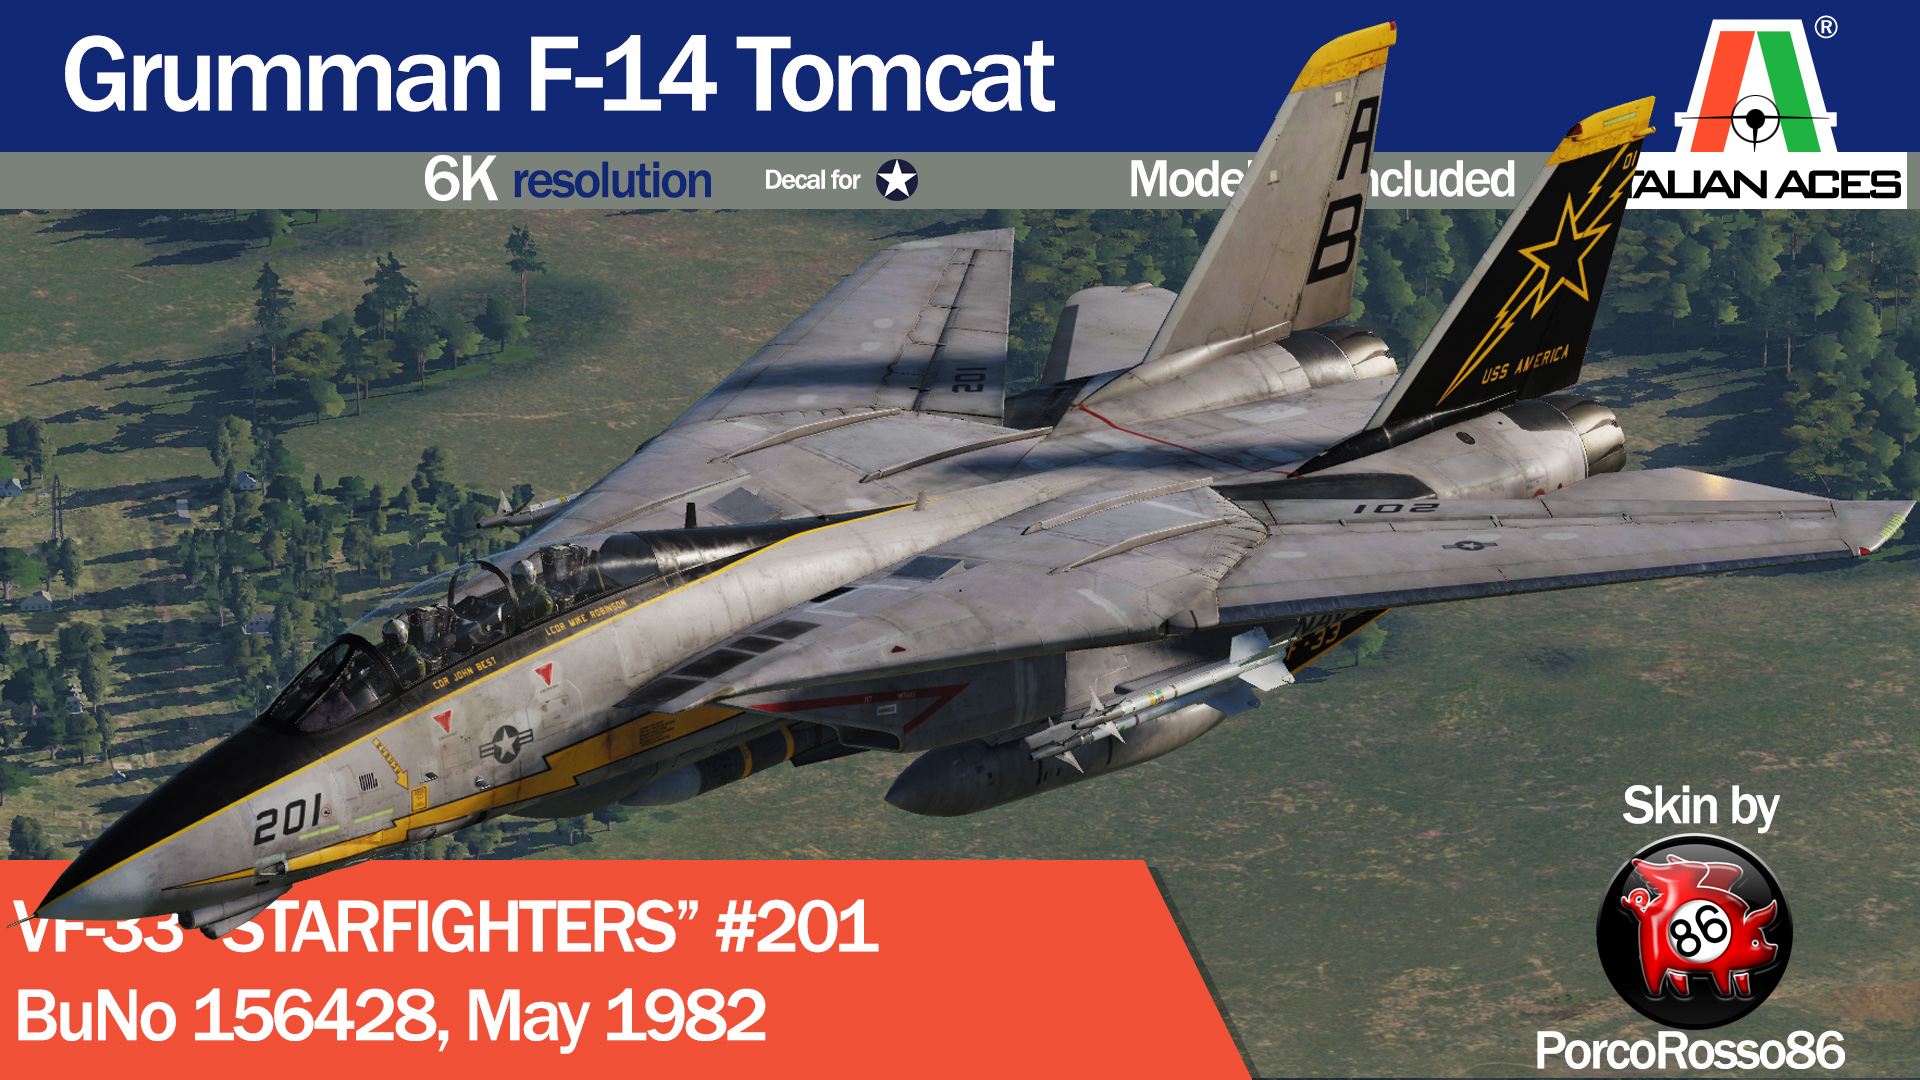 F-14 VF-33 "Starfighters" #201 by PorcoRosso86